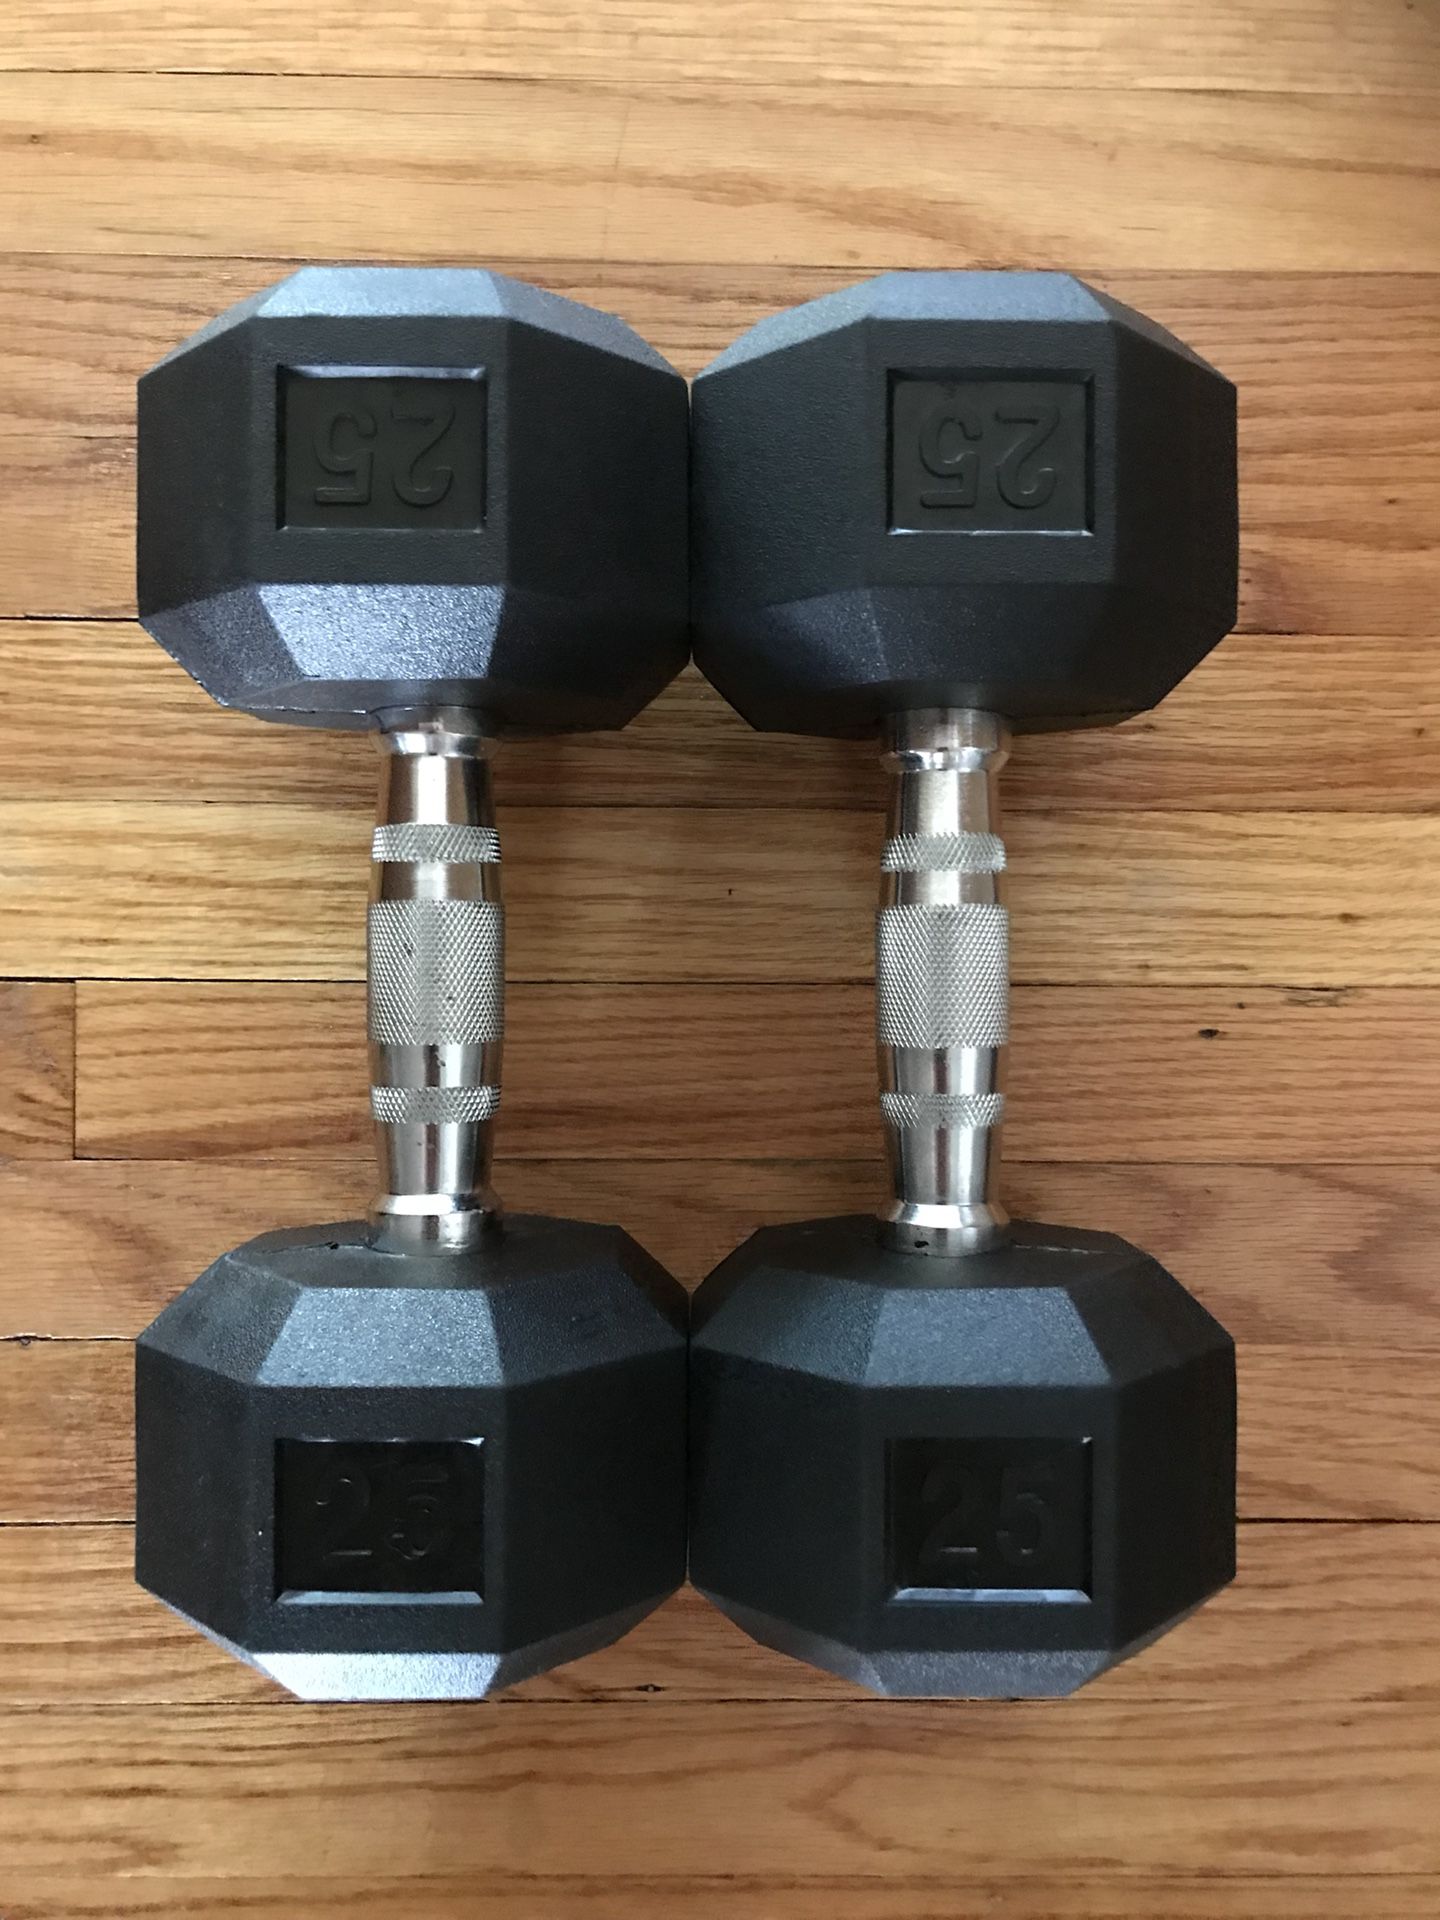 NEW Rubber Dumbbells (2x25s) for $50 Firm!!!